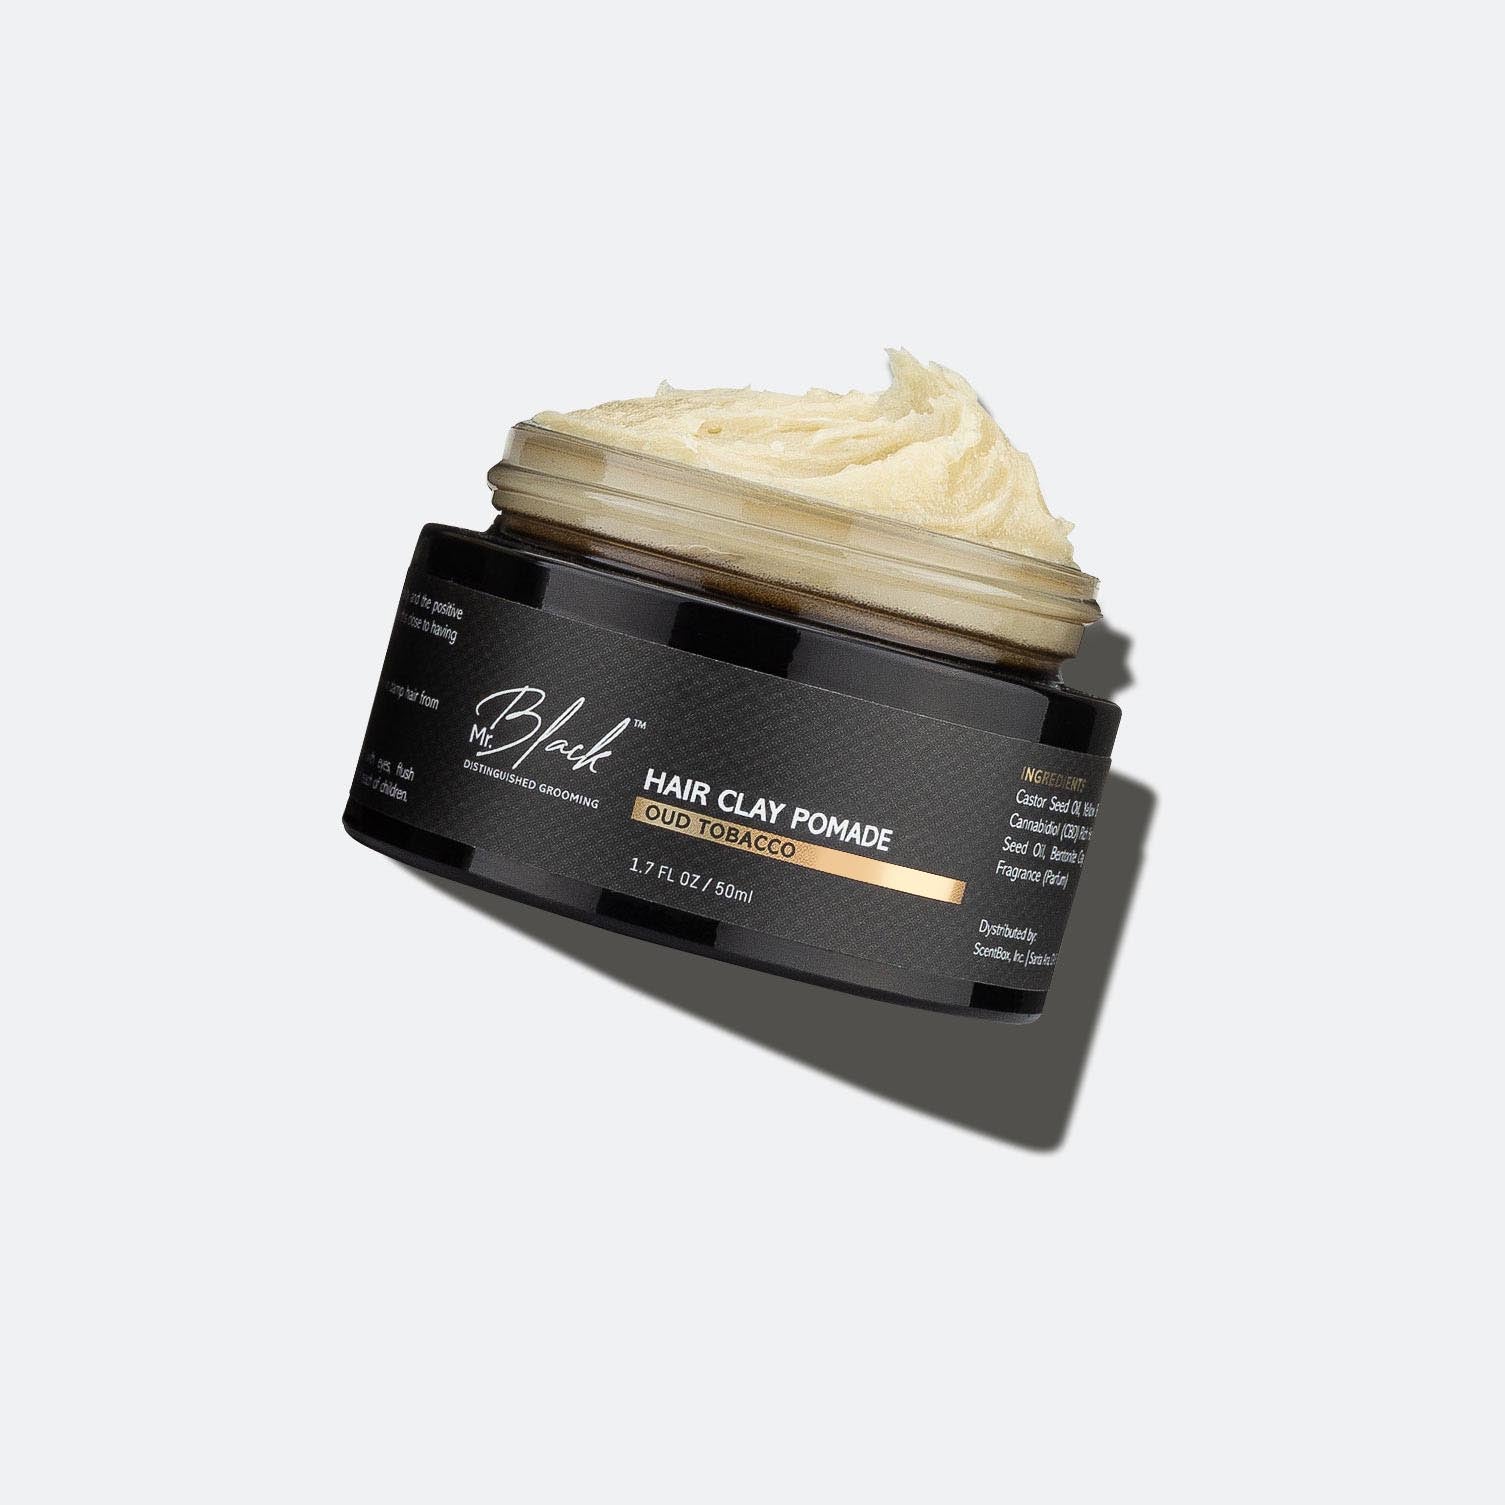 Image of Hair Clay Pomade - Oud Tobacco